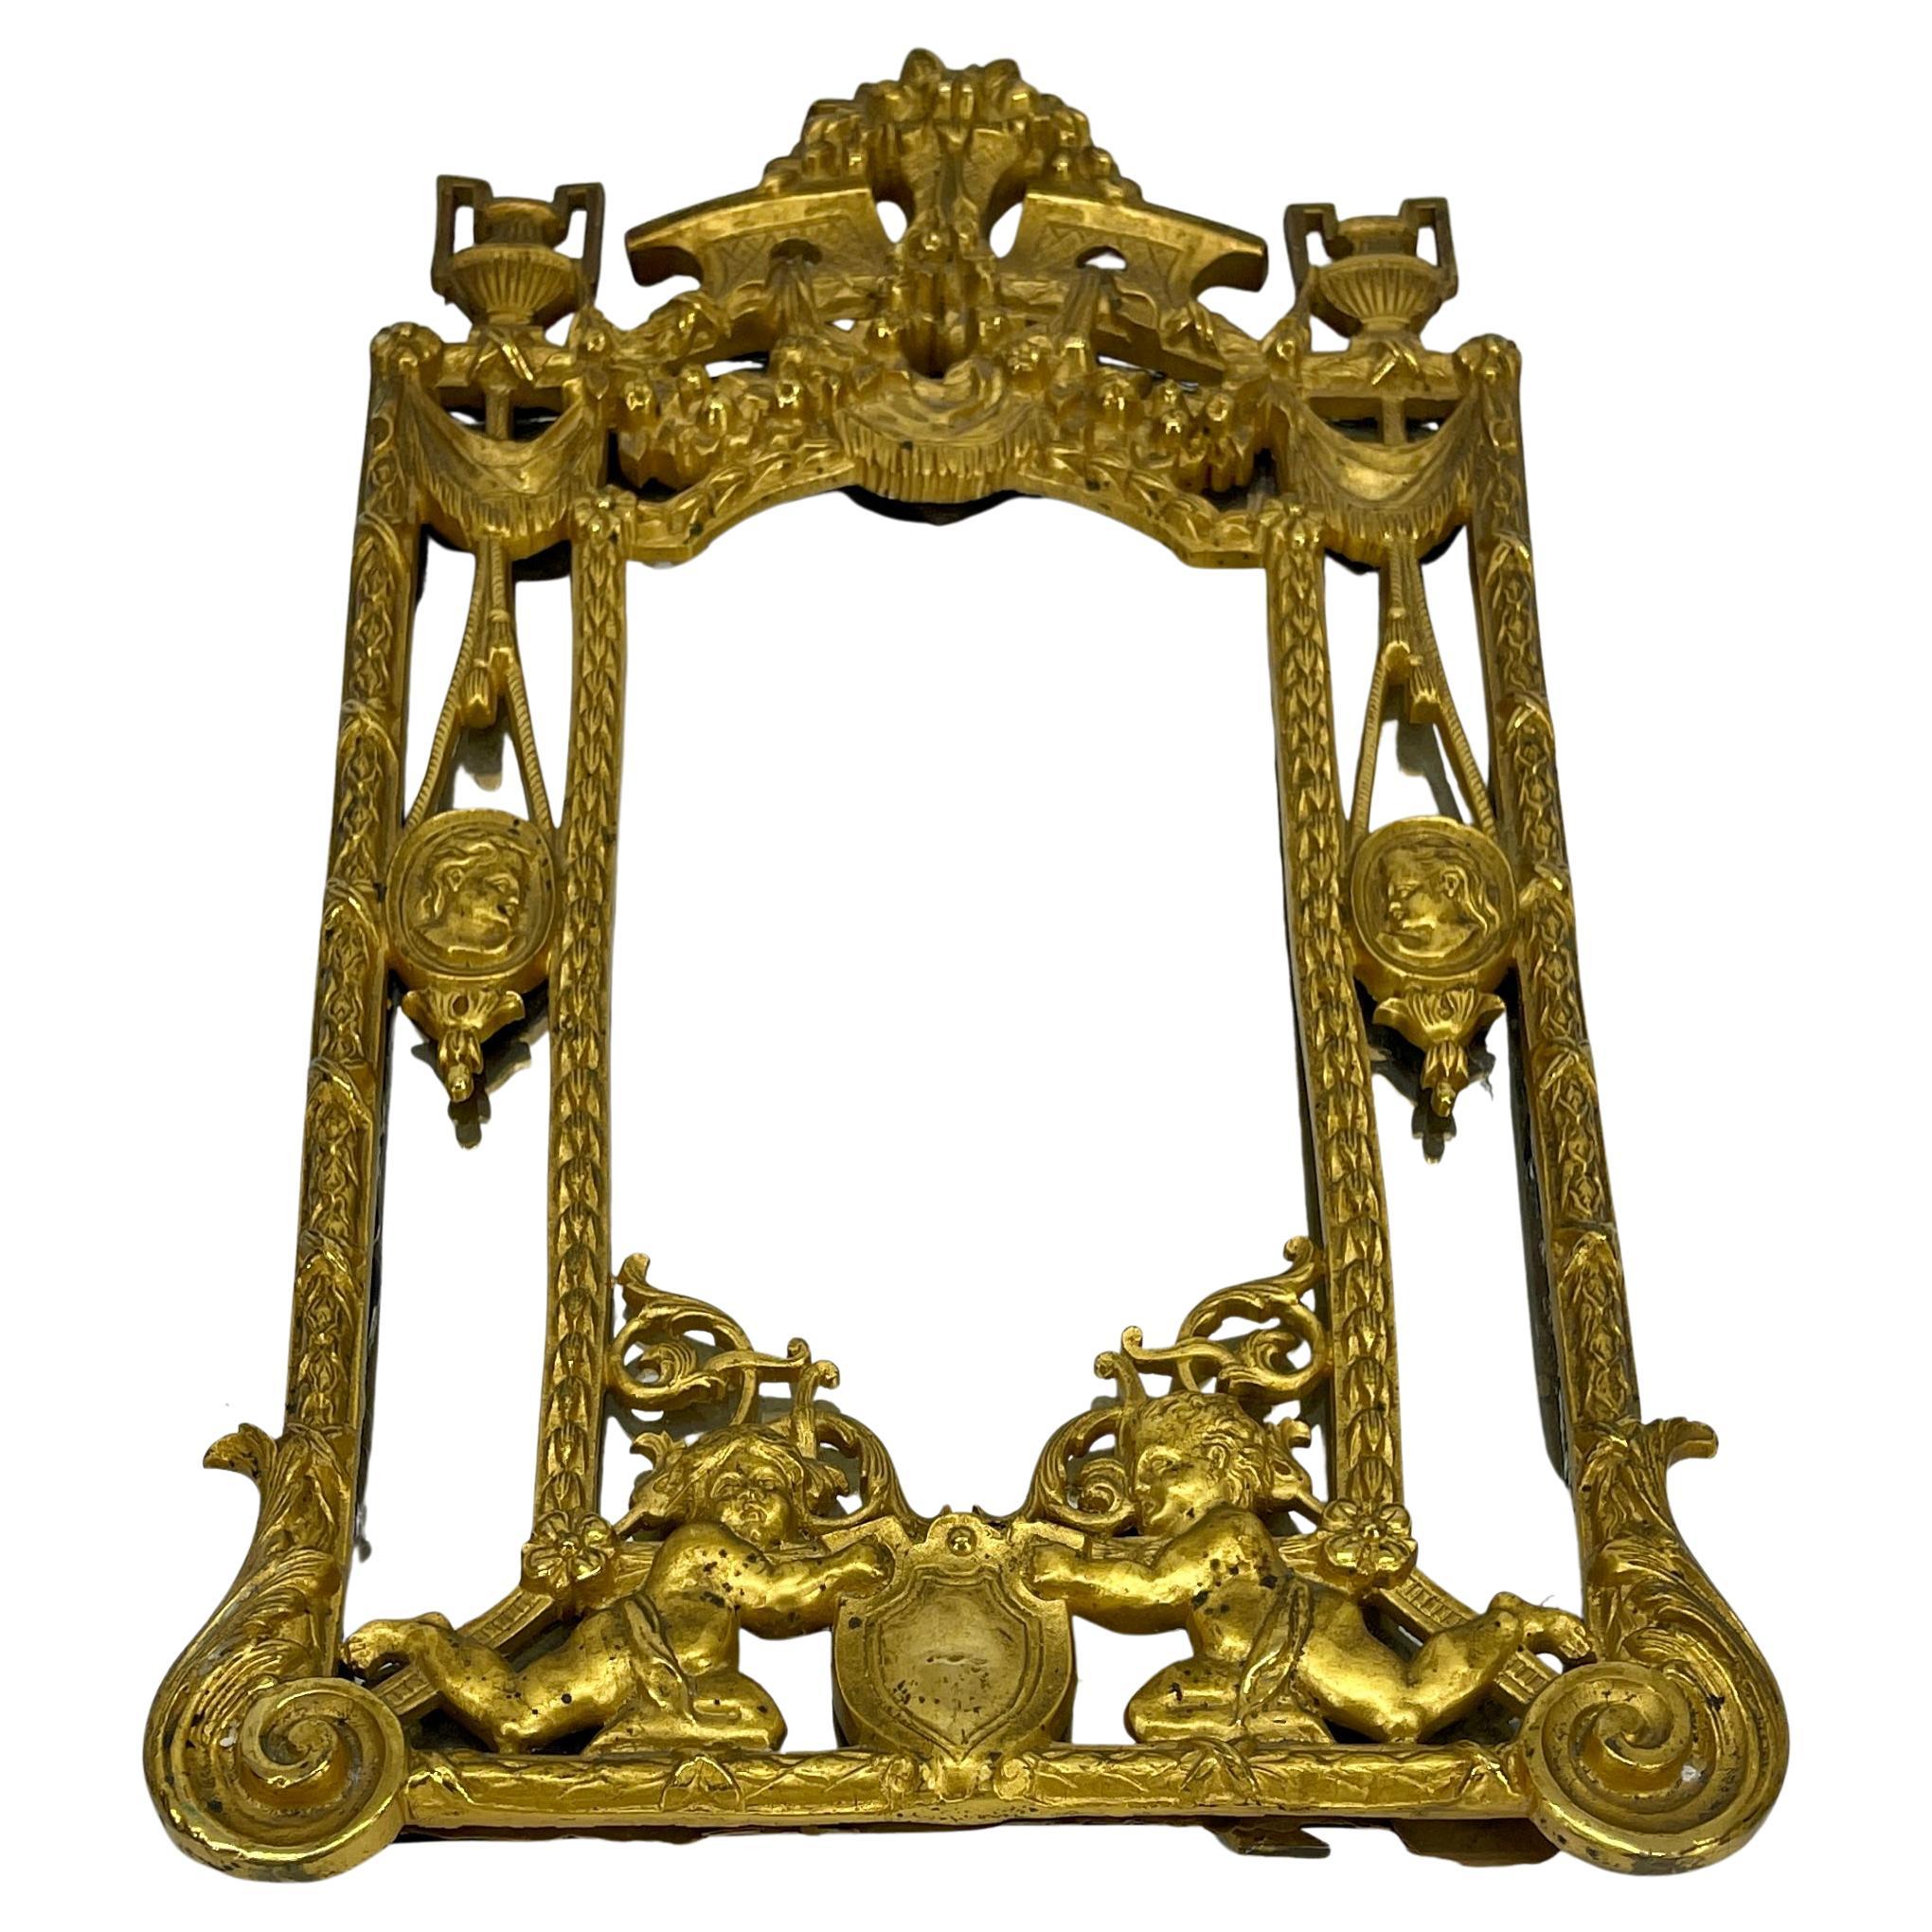 19th Century Louis XVI Gilded Bronze Vanity MirrorThis fine table mirror is of the Empire style, early 19th century. The mirror is designed in dual layered arch form, featuring a larger outer arch and a smaller inner arch. There is a large mirrored